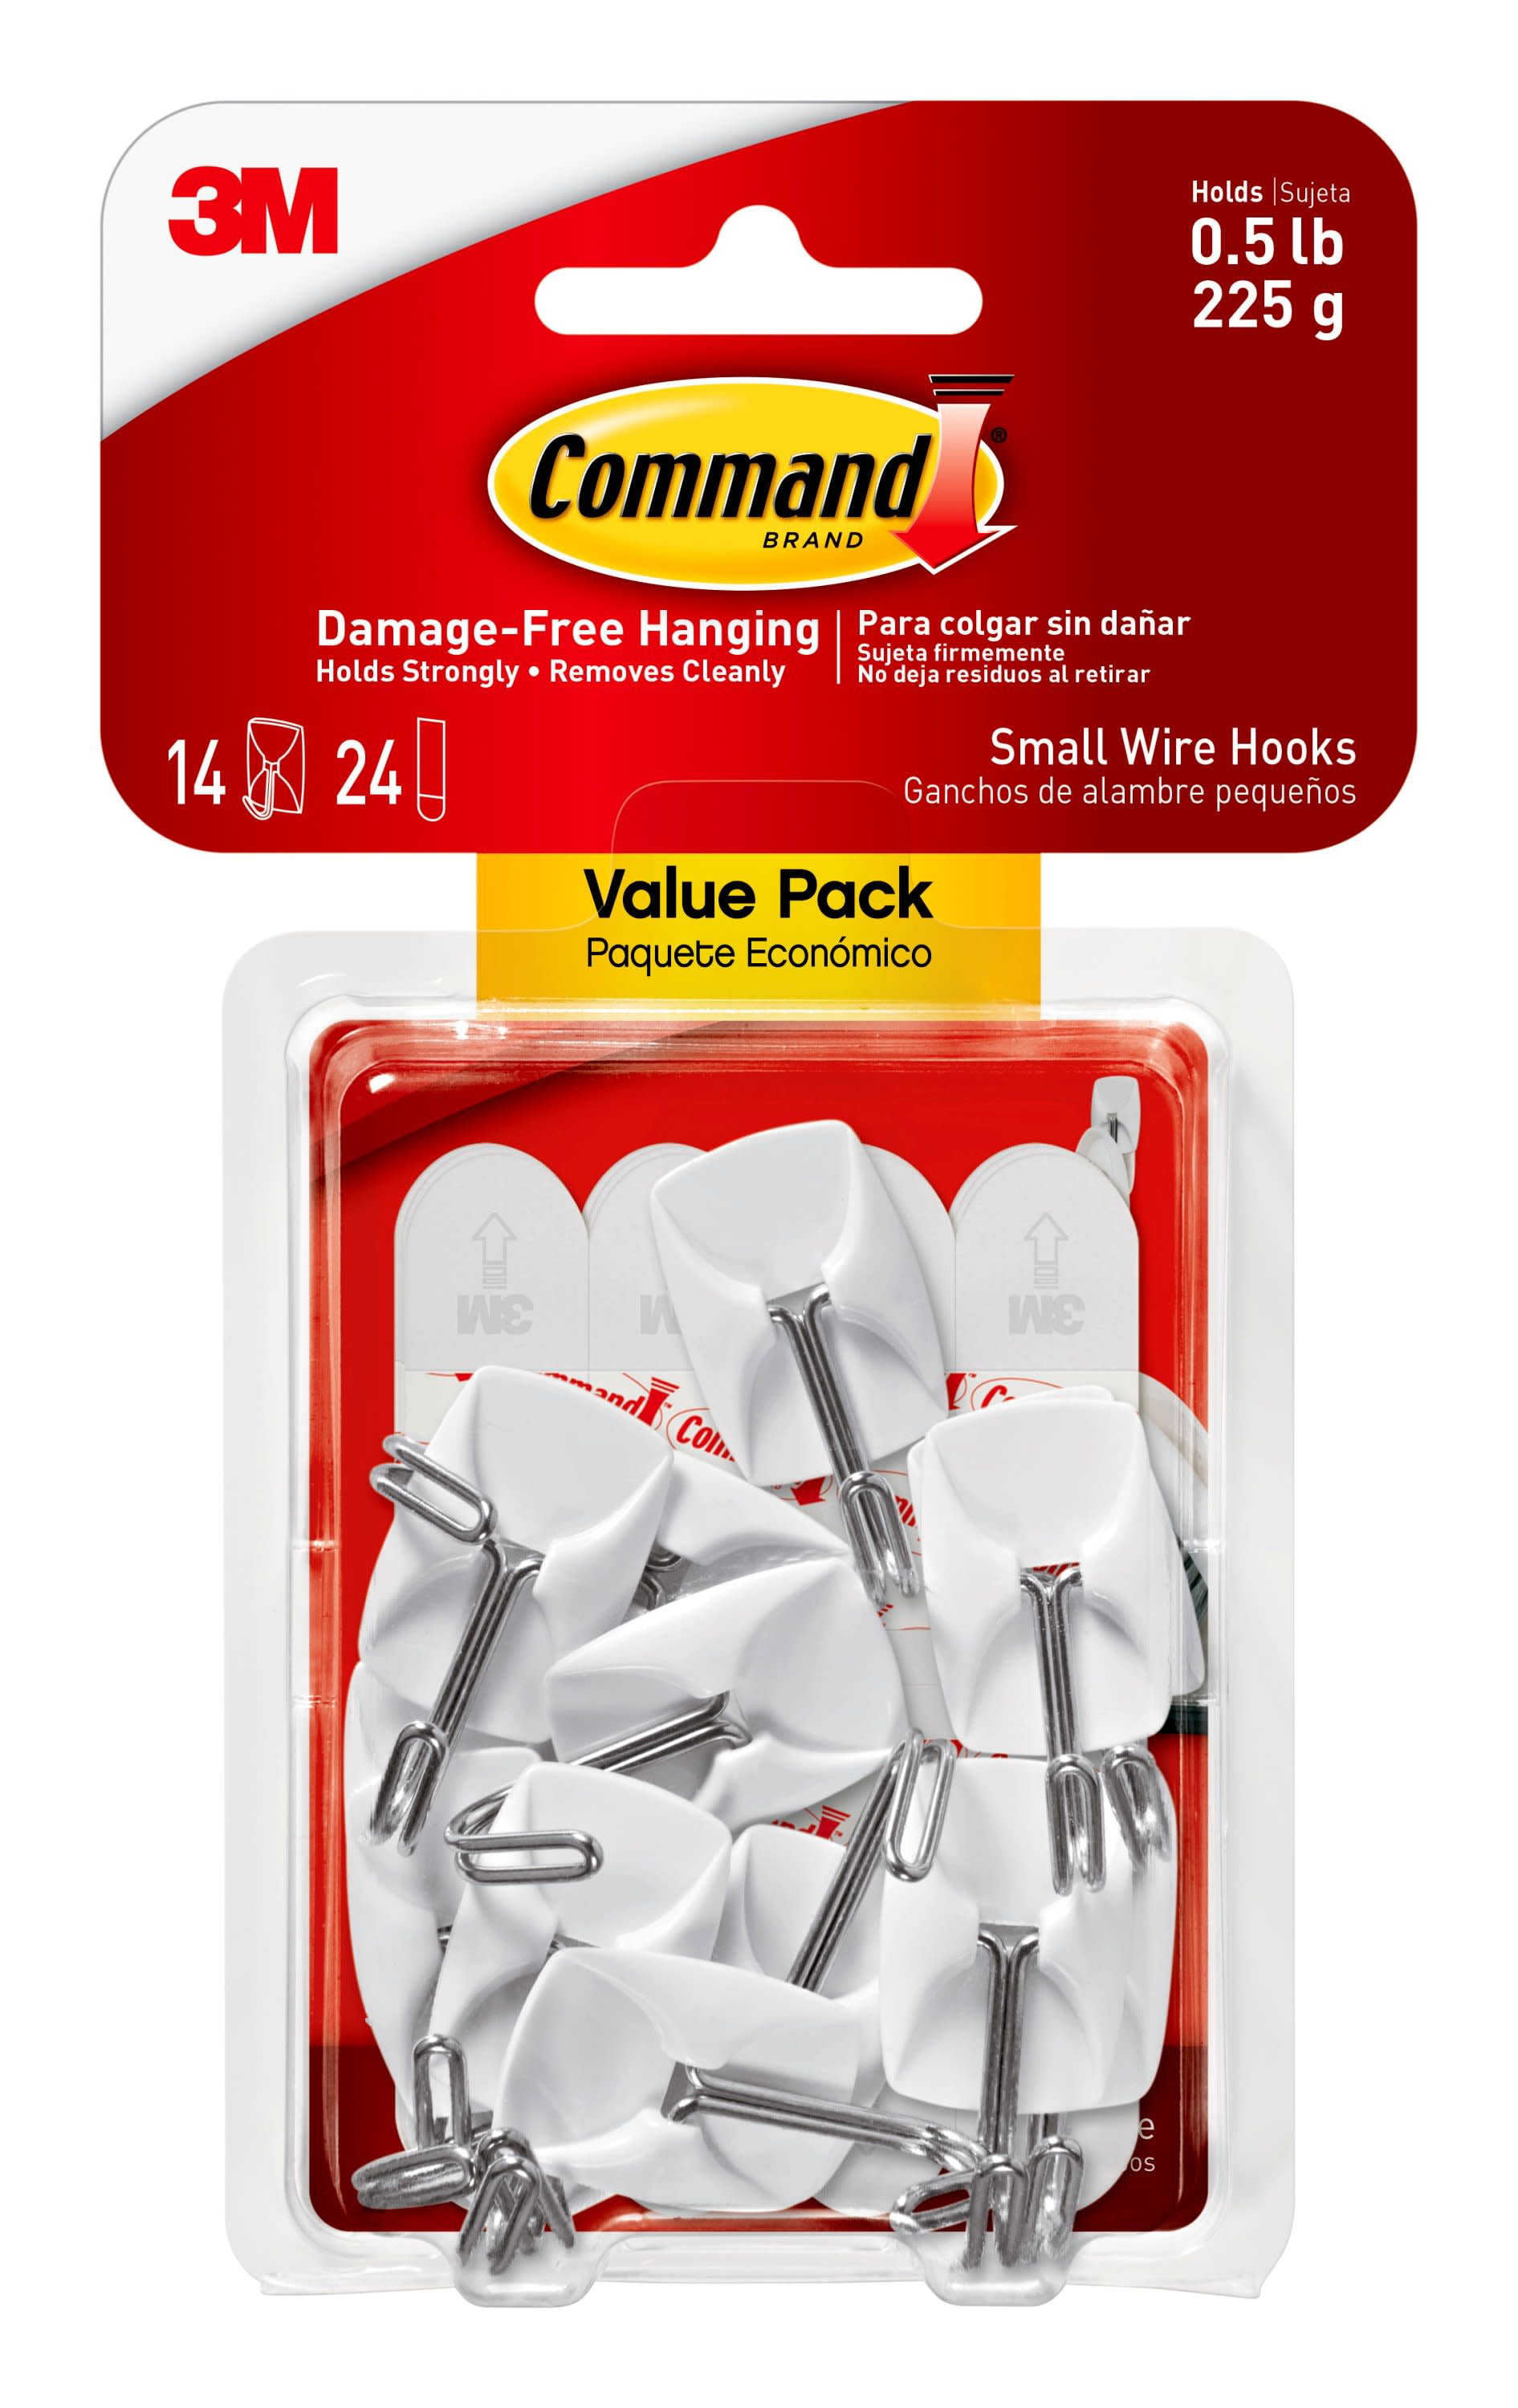 3M Command Brand Small Wire Hooks*General Purpose*Holds 0.5 lbs*No Damage Wall 